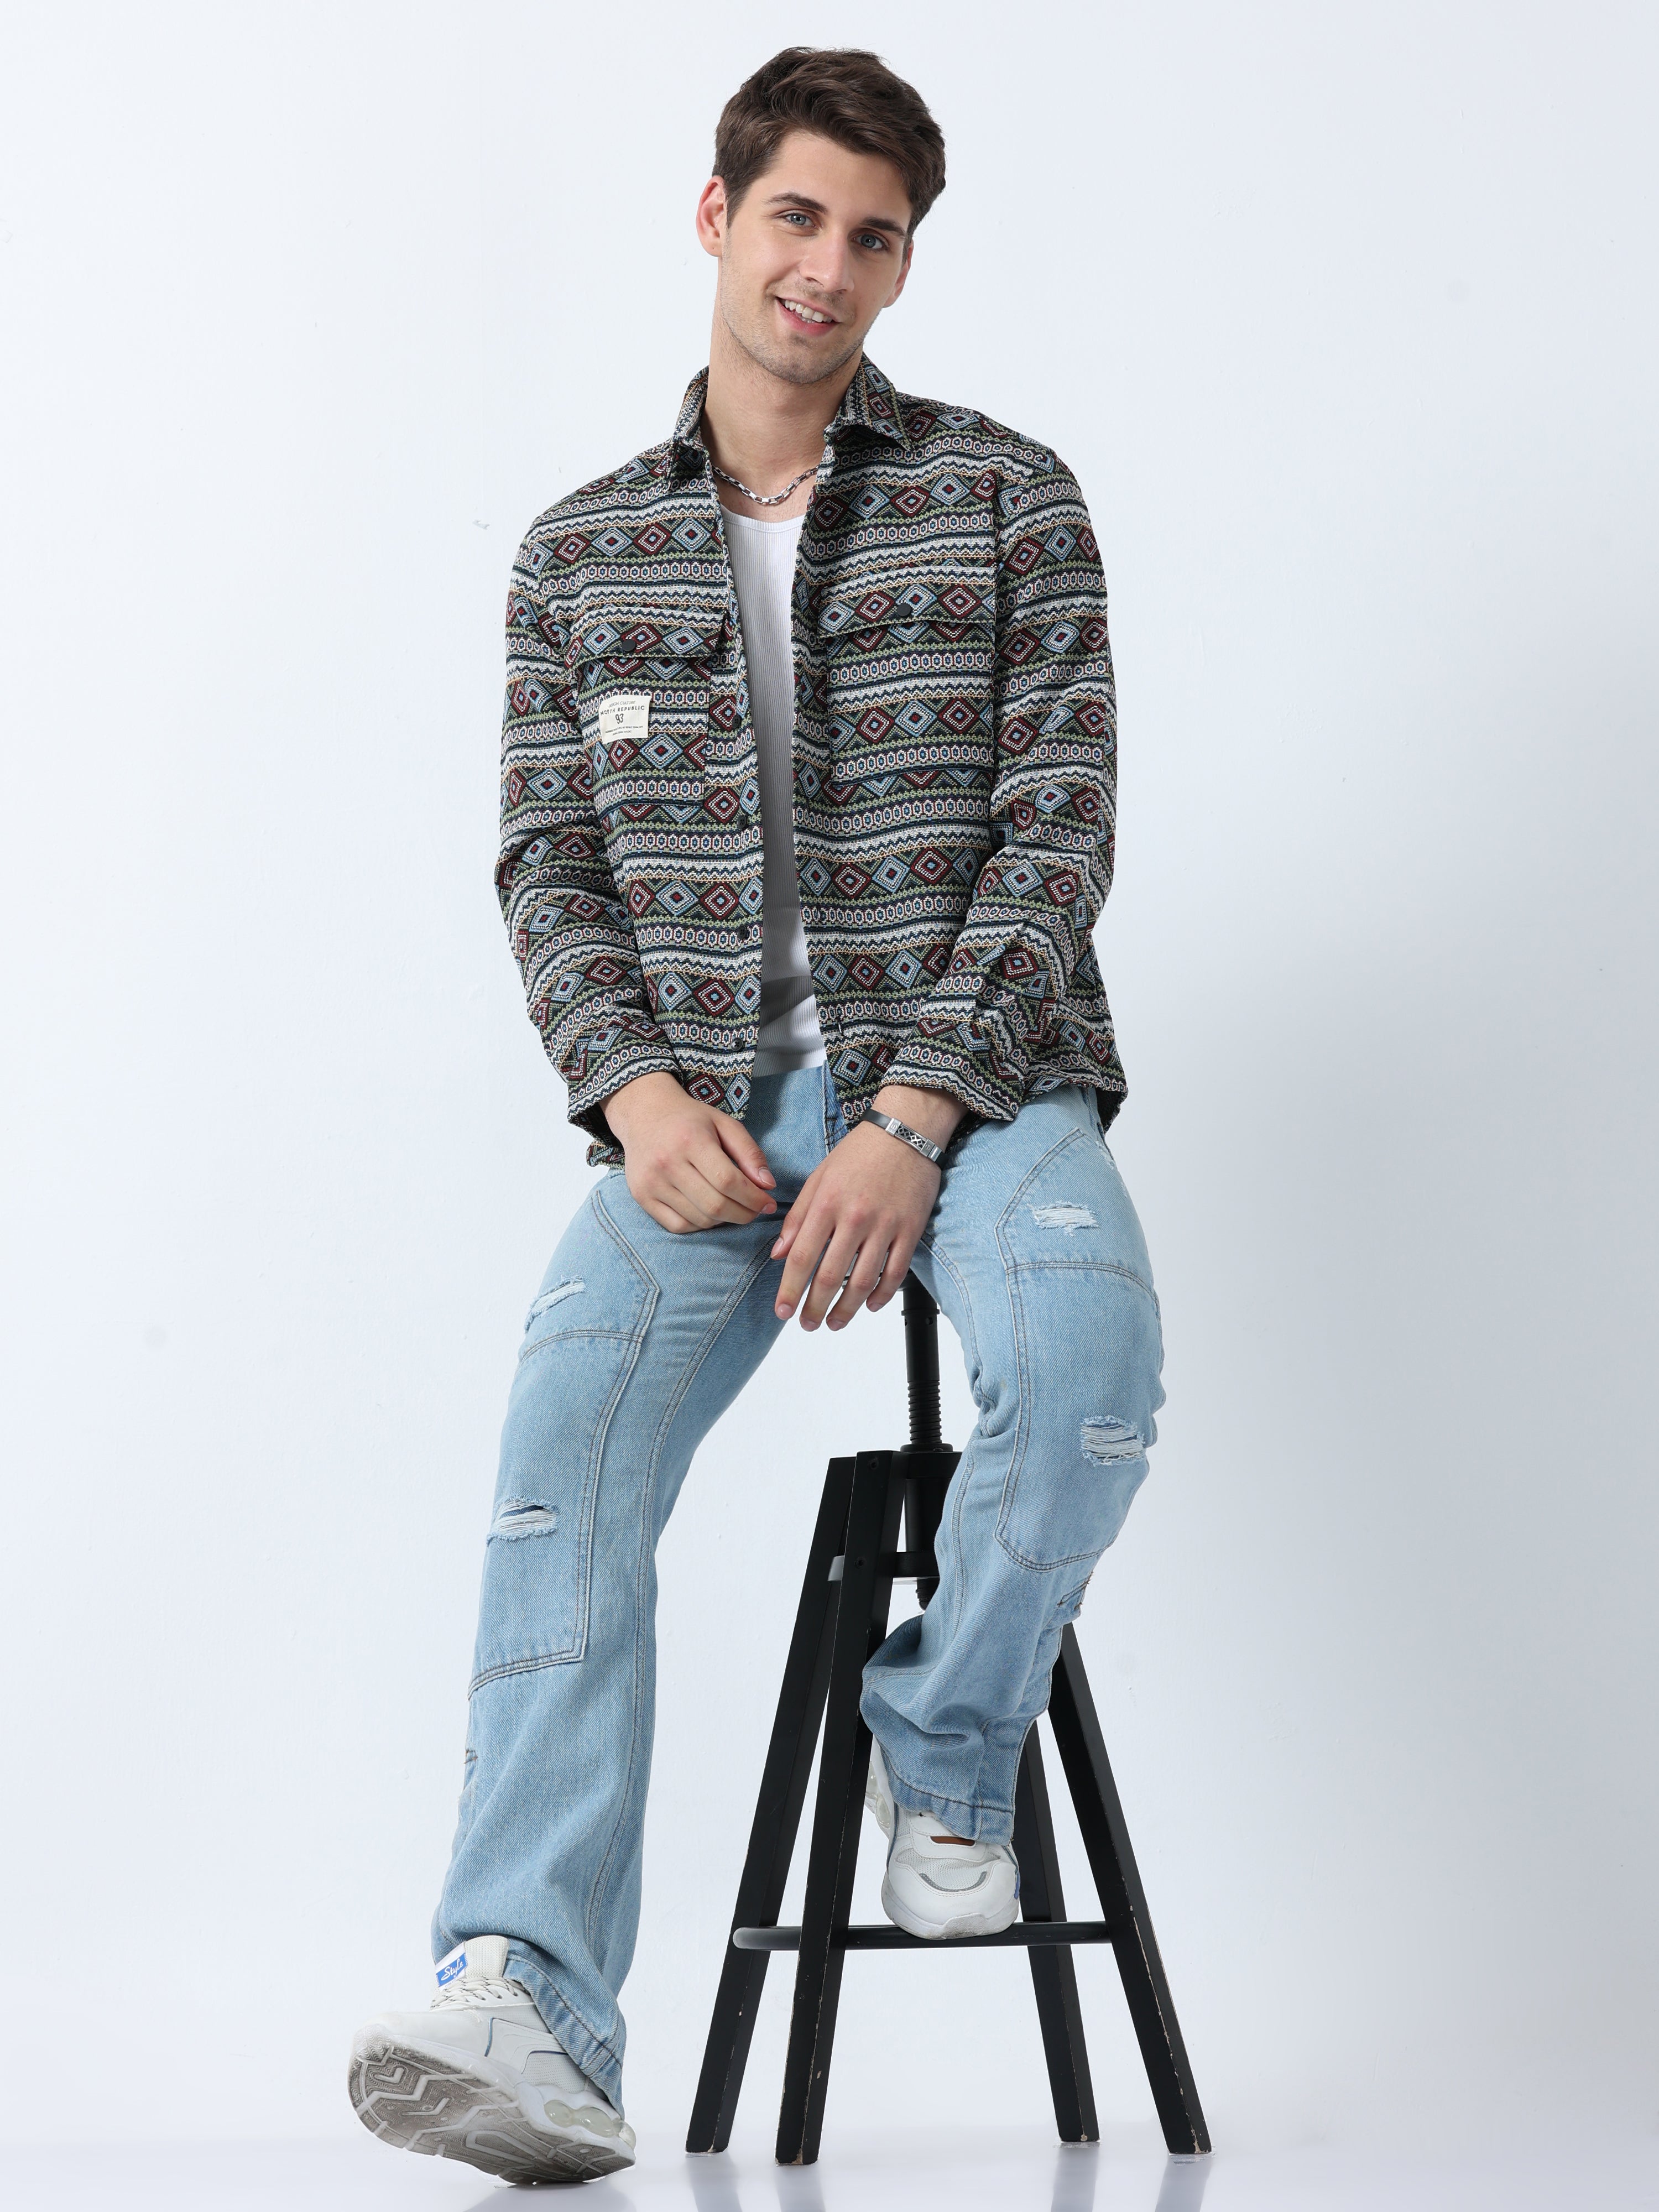 Buy White Shirts for Men by LEVIS Online | Ajio.com